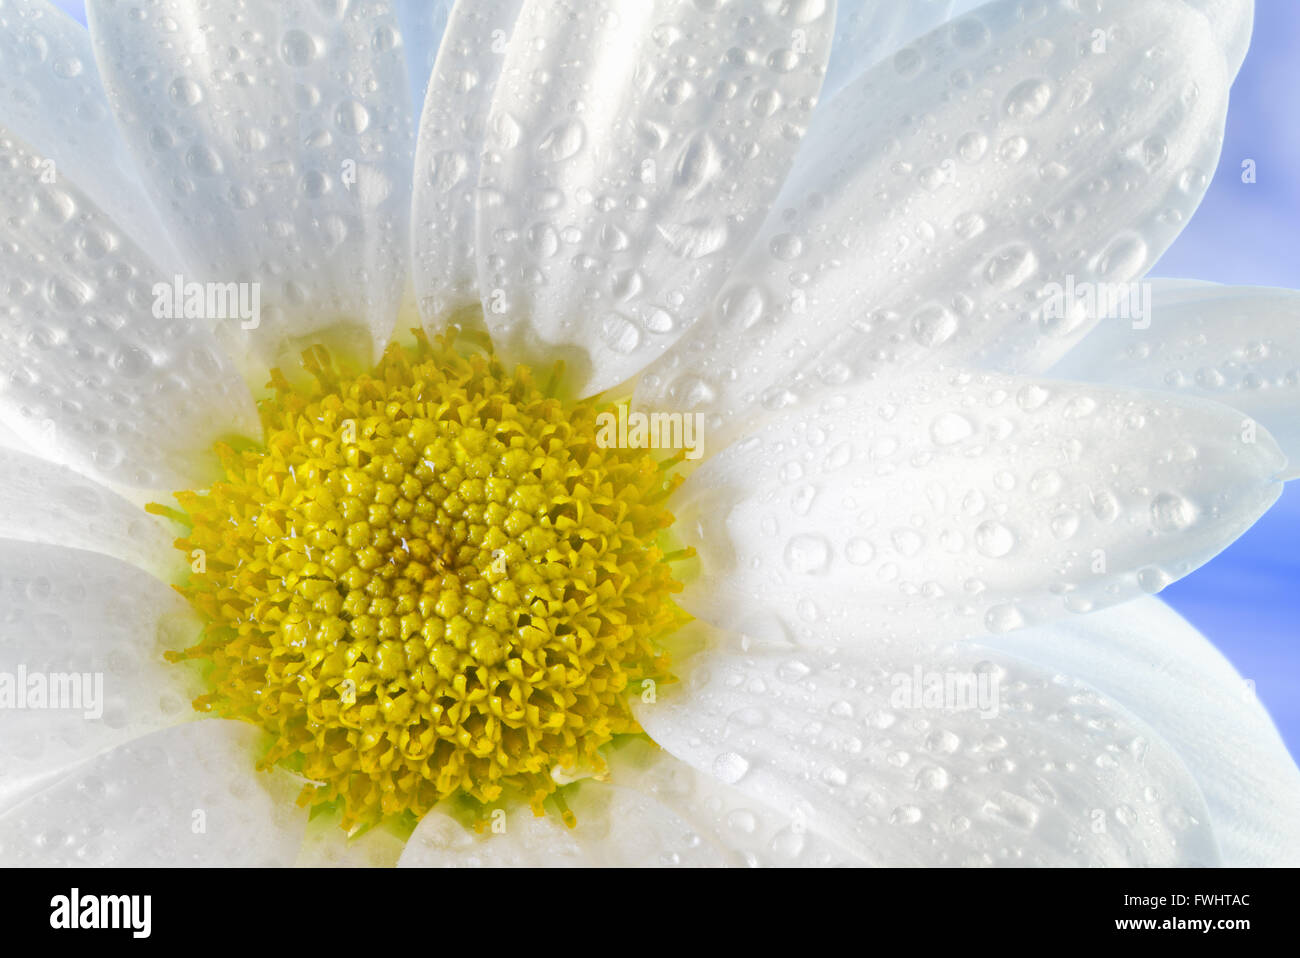 daisy with water drops on the blue background. Stock Photo